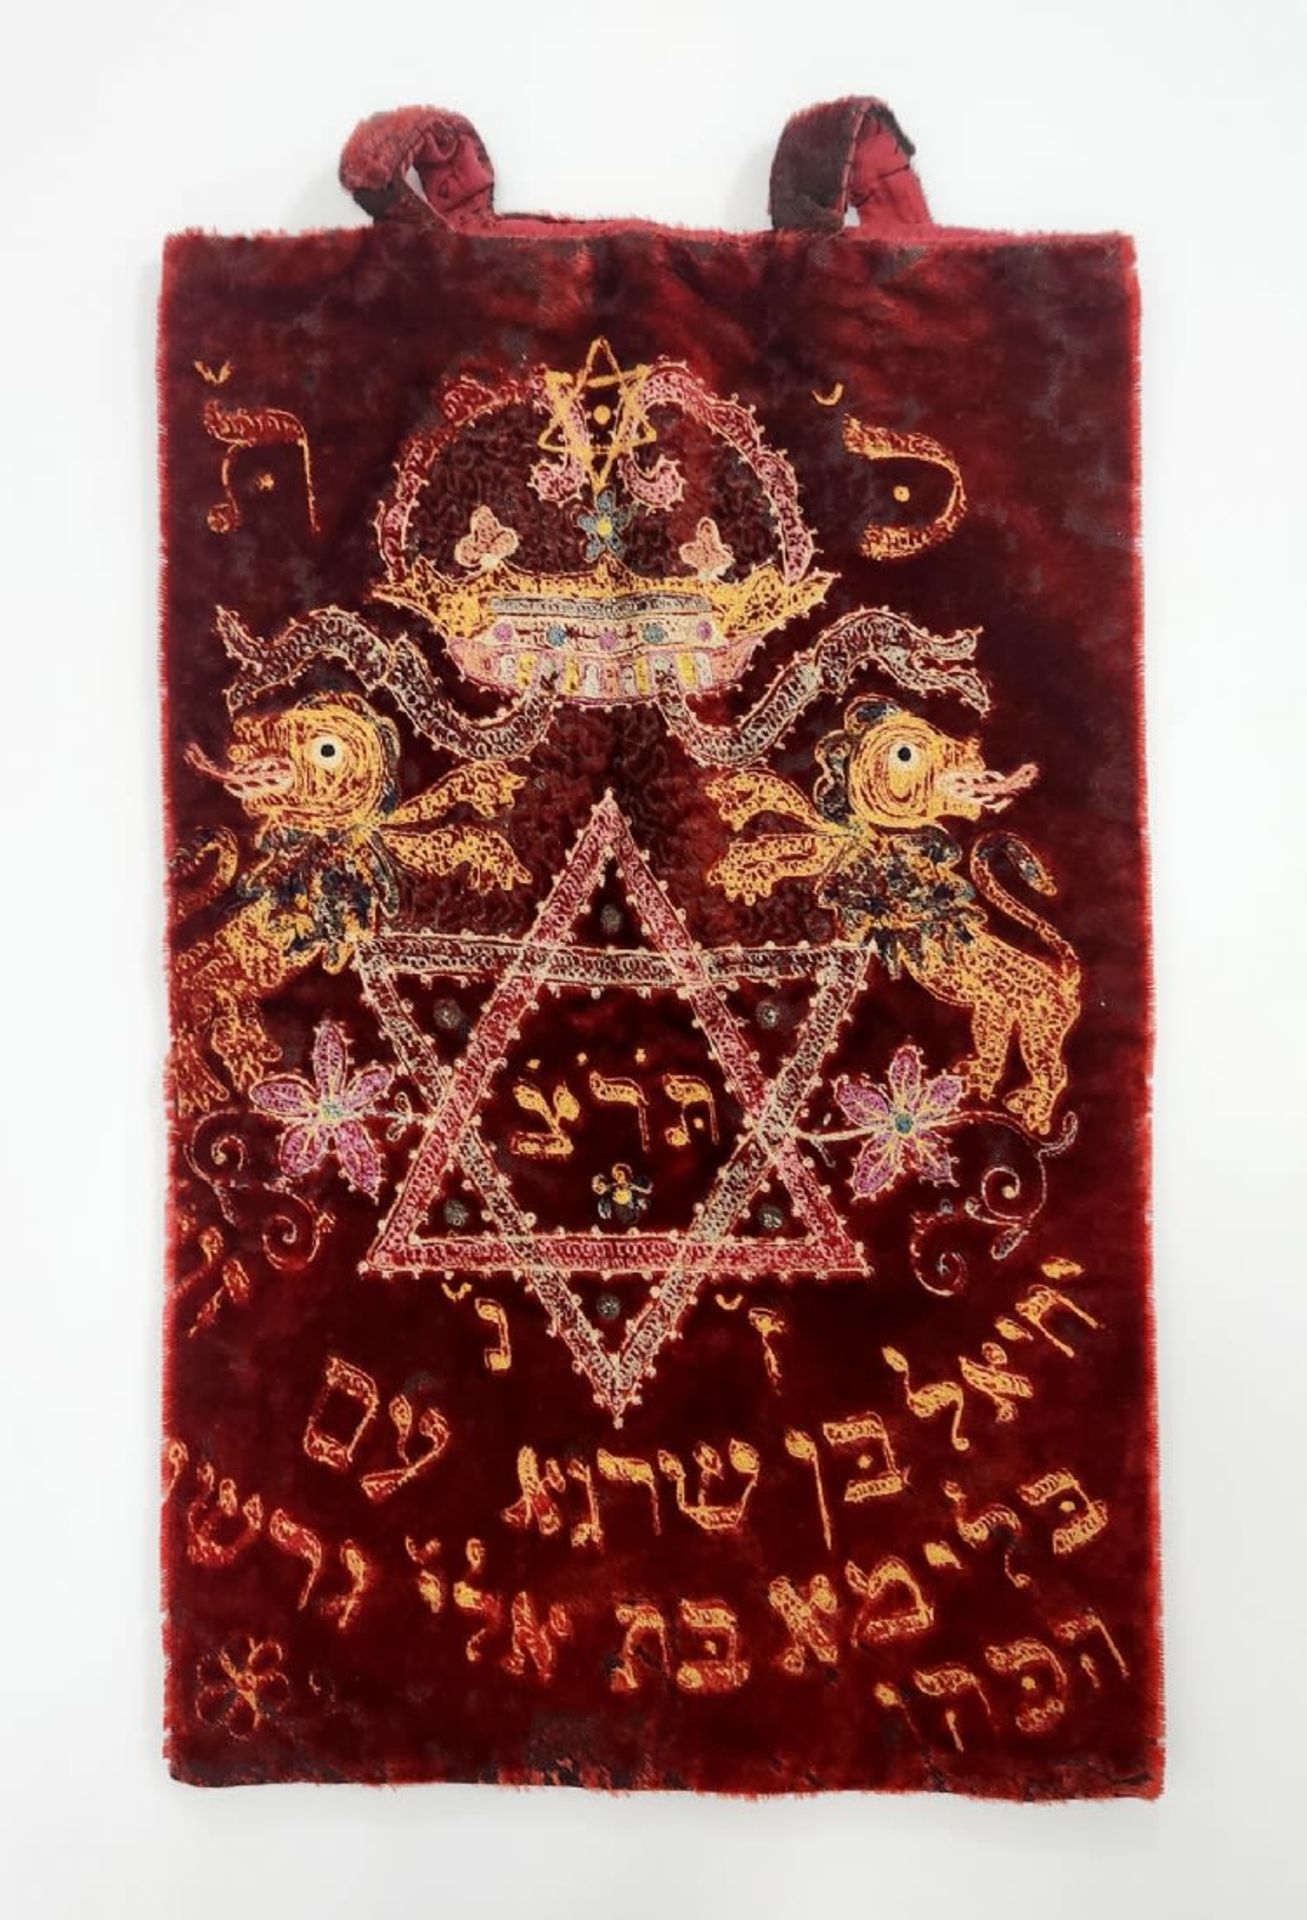 A Torah scroll coat, embroidered with cotton threads on red velvet, dating from 1929, the subject of